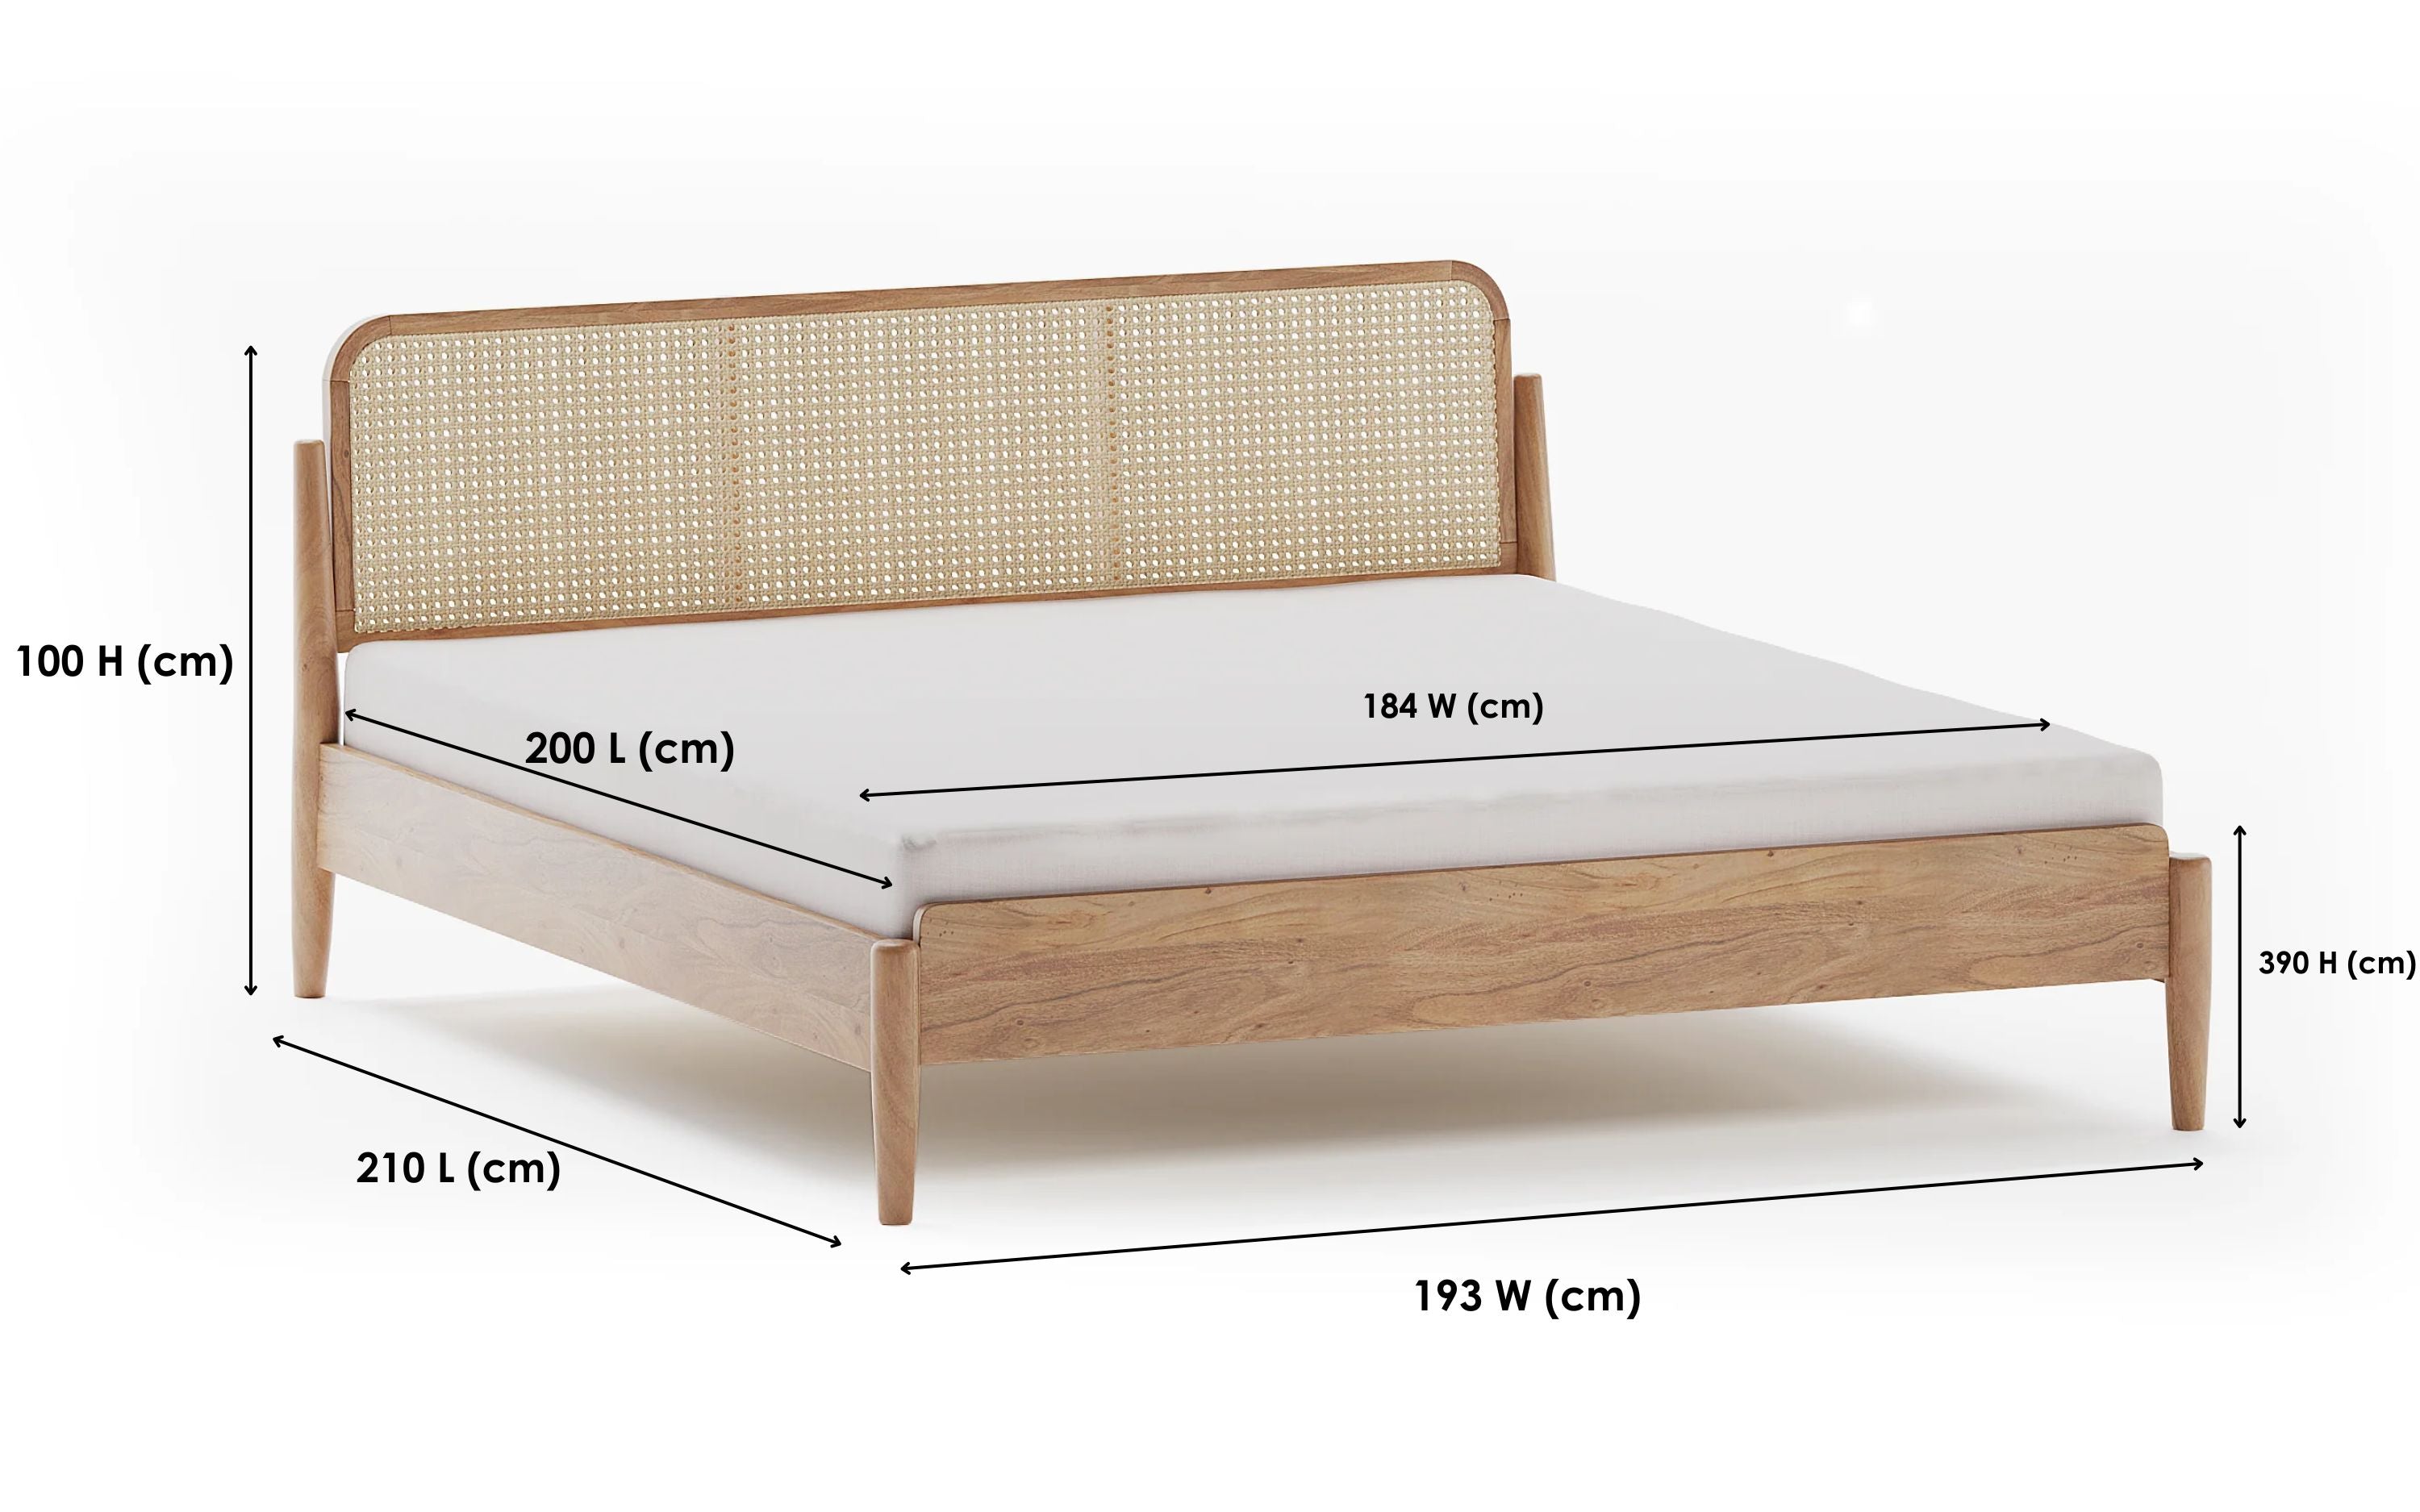 Meadow King Non Storage Bed